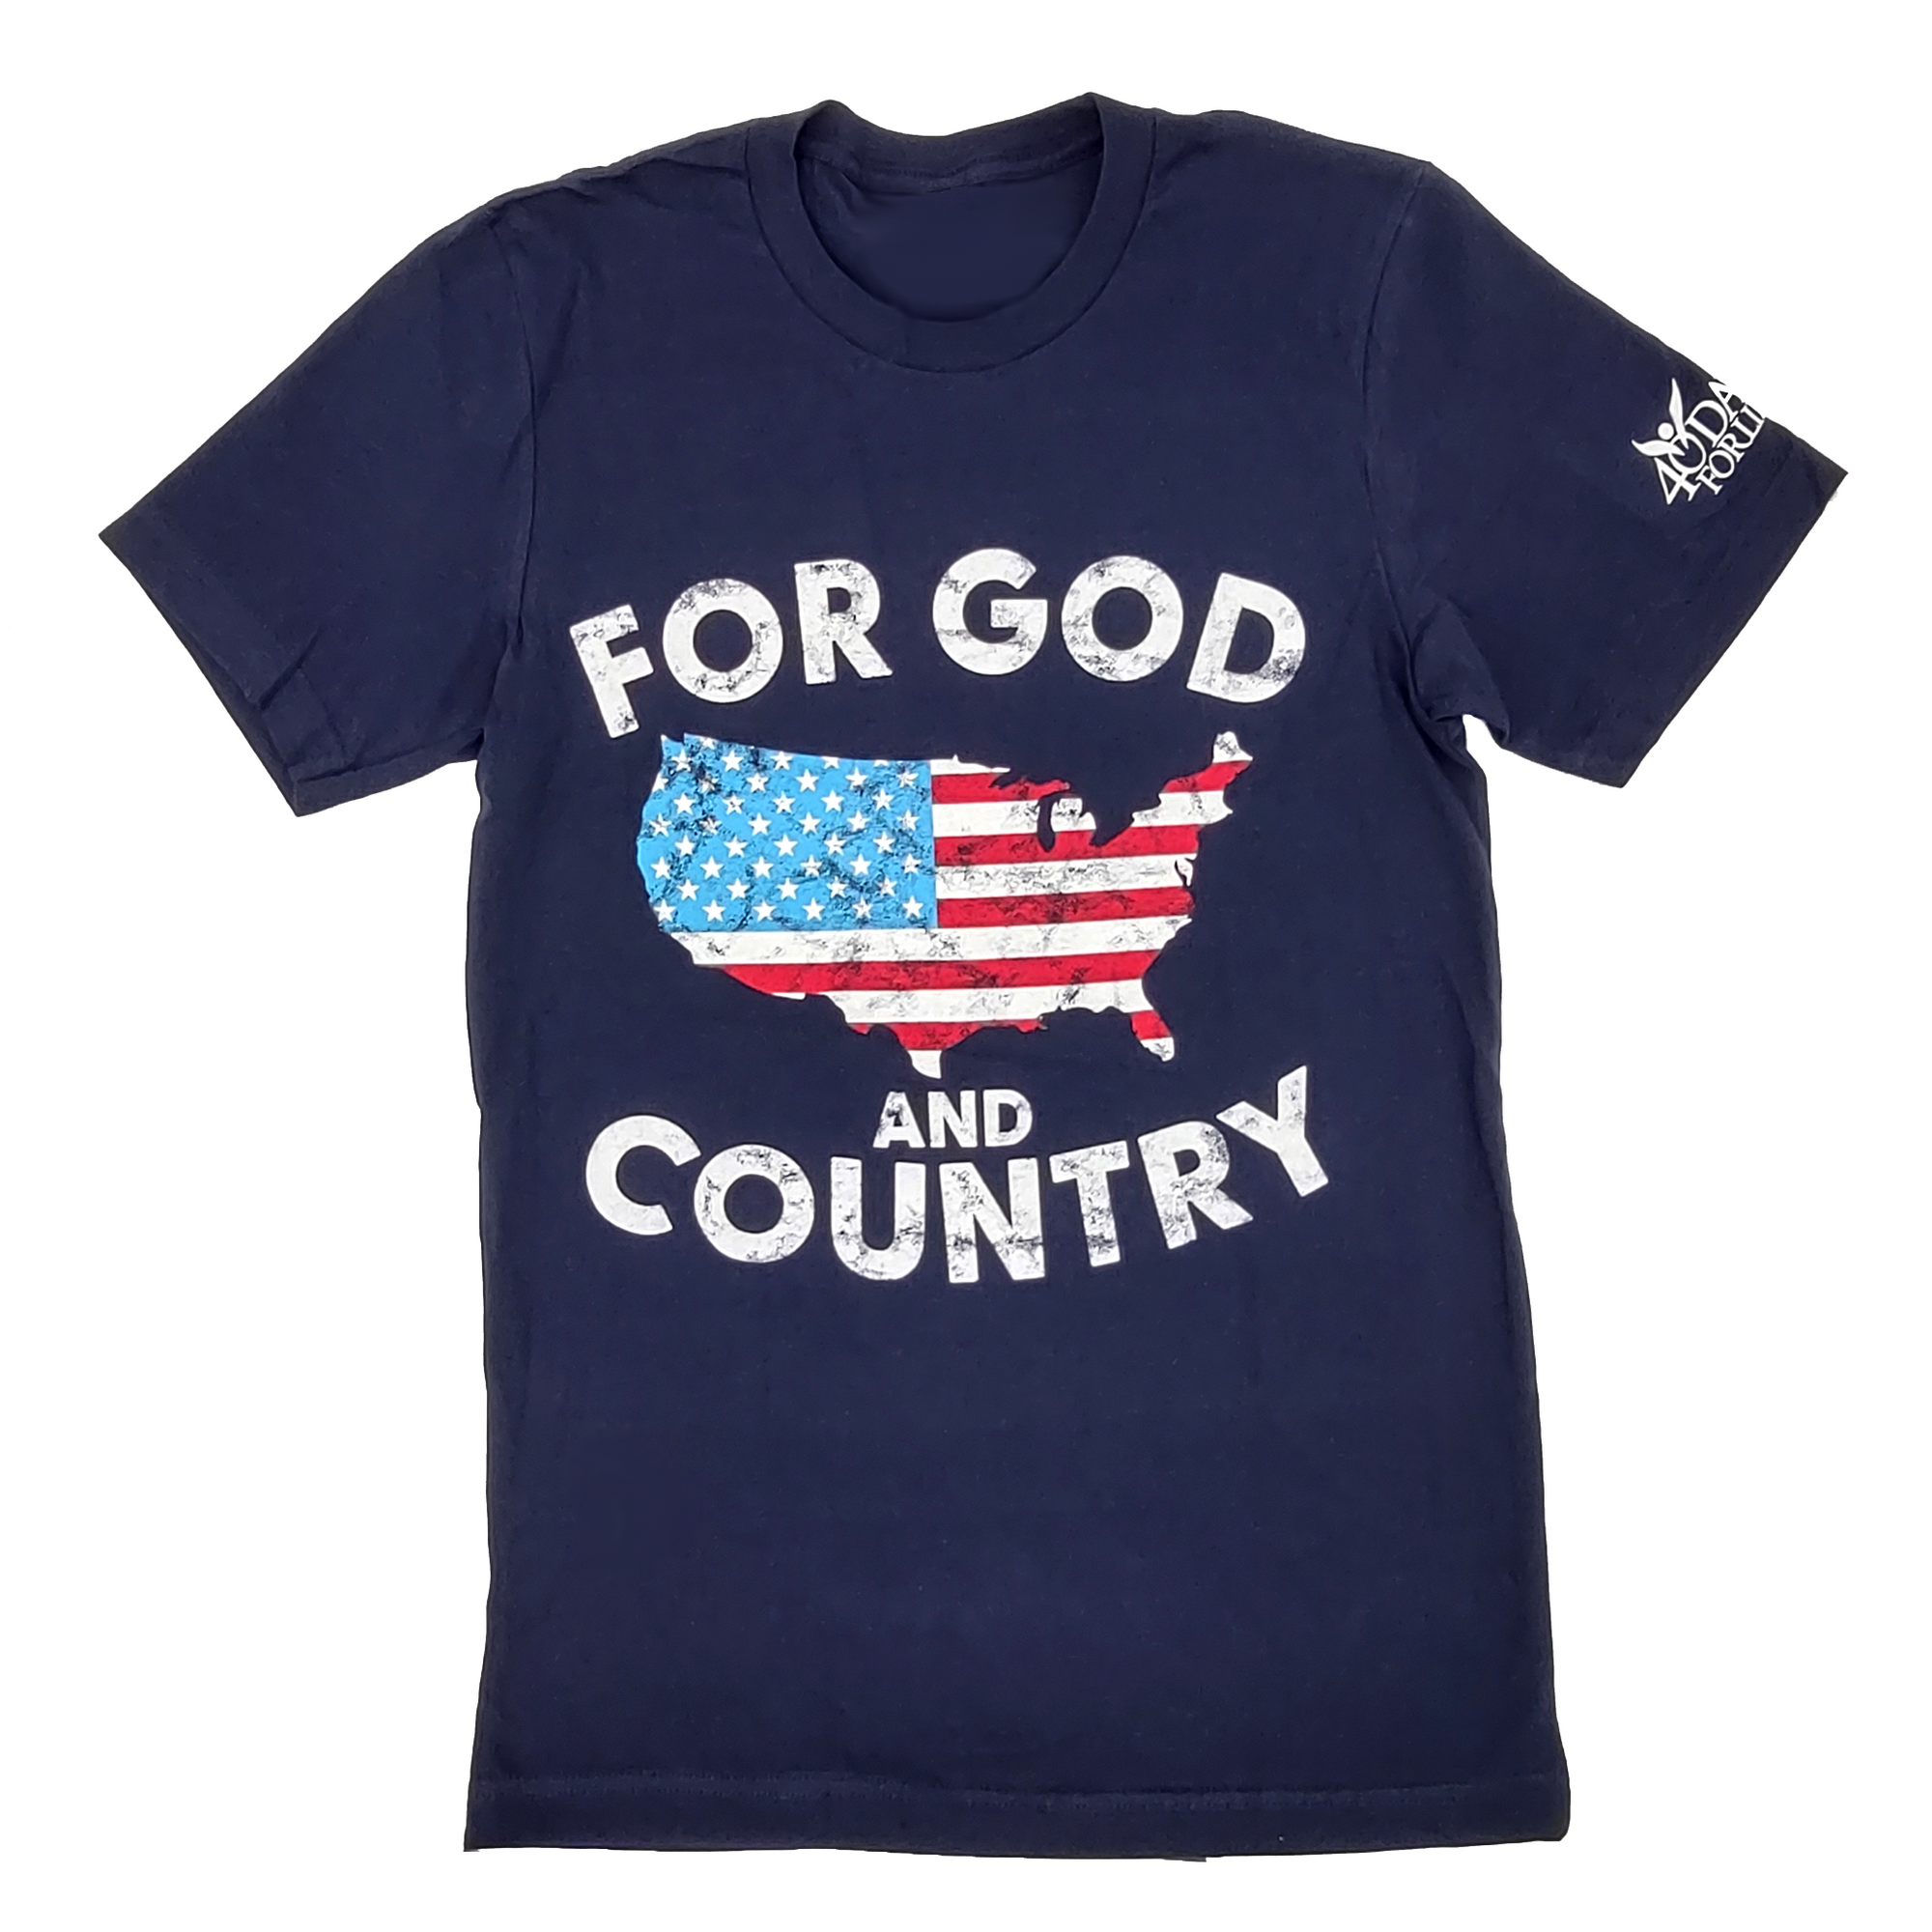 For God and Country T-Shirt